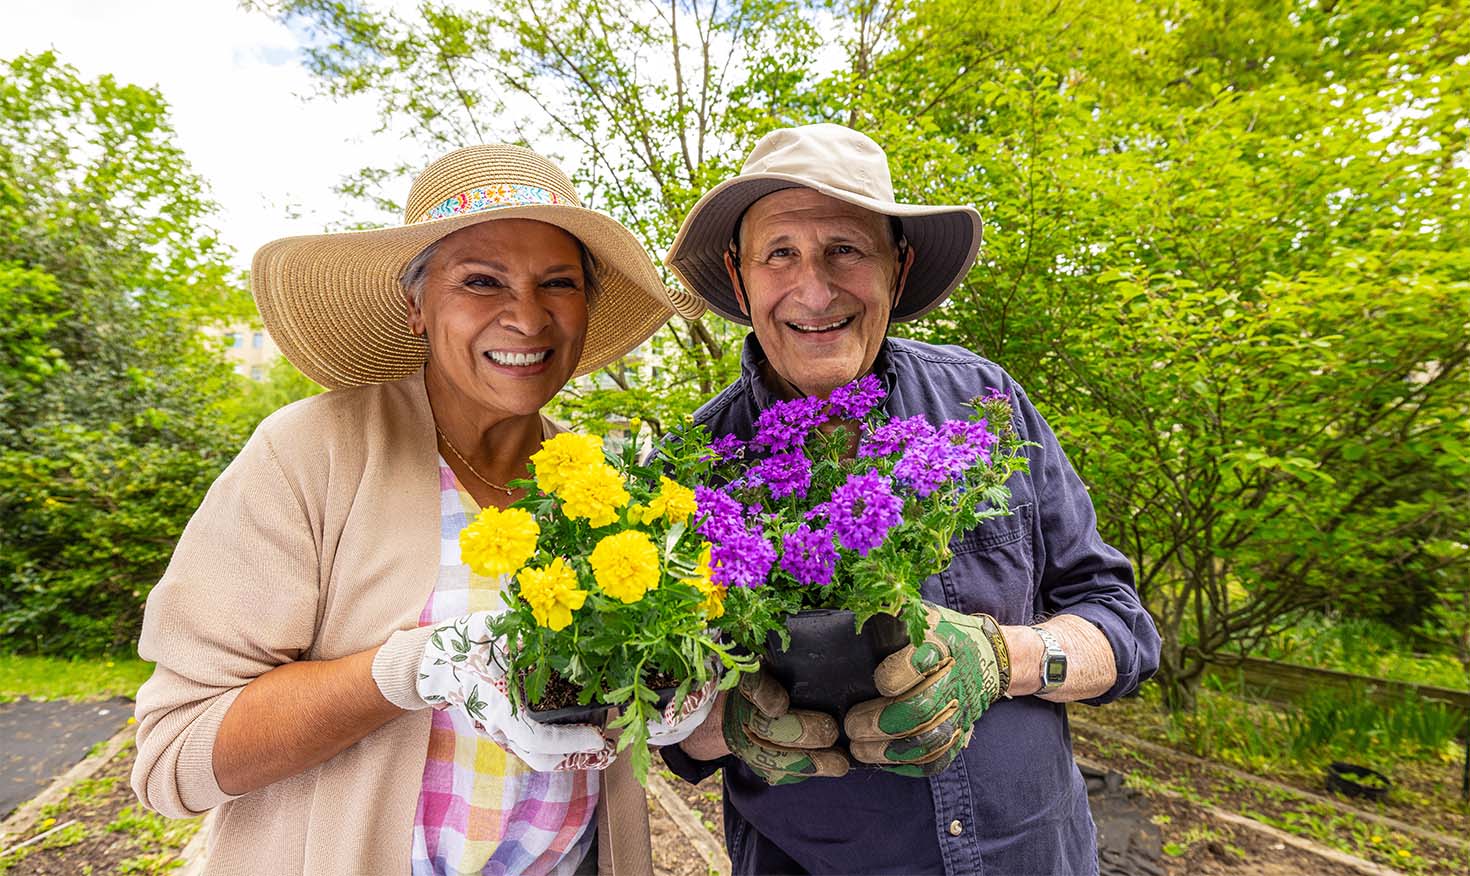 Senior man and senior woman in sun hats holding up yellow and purple flowers in the garden